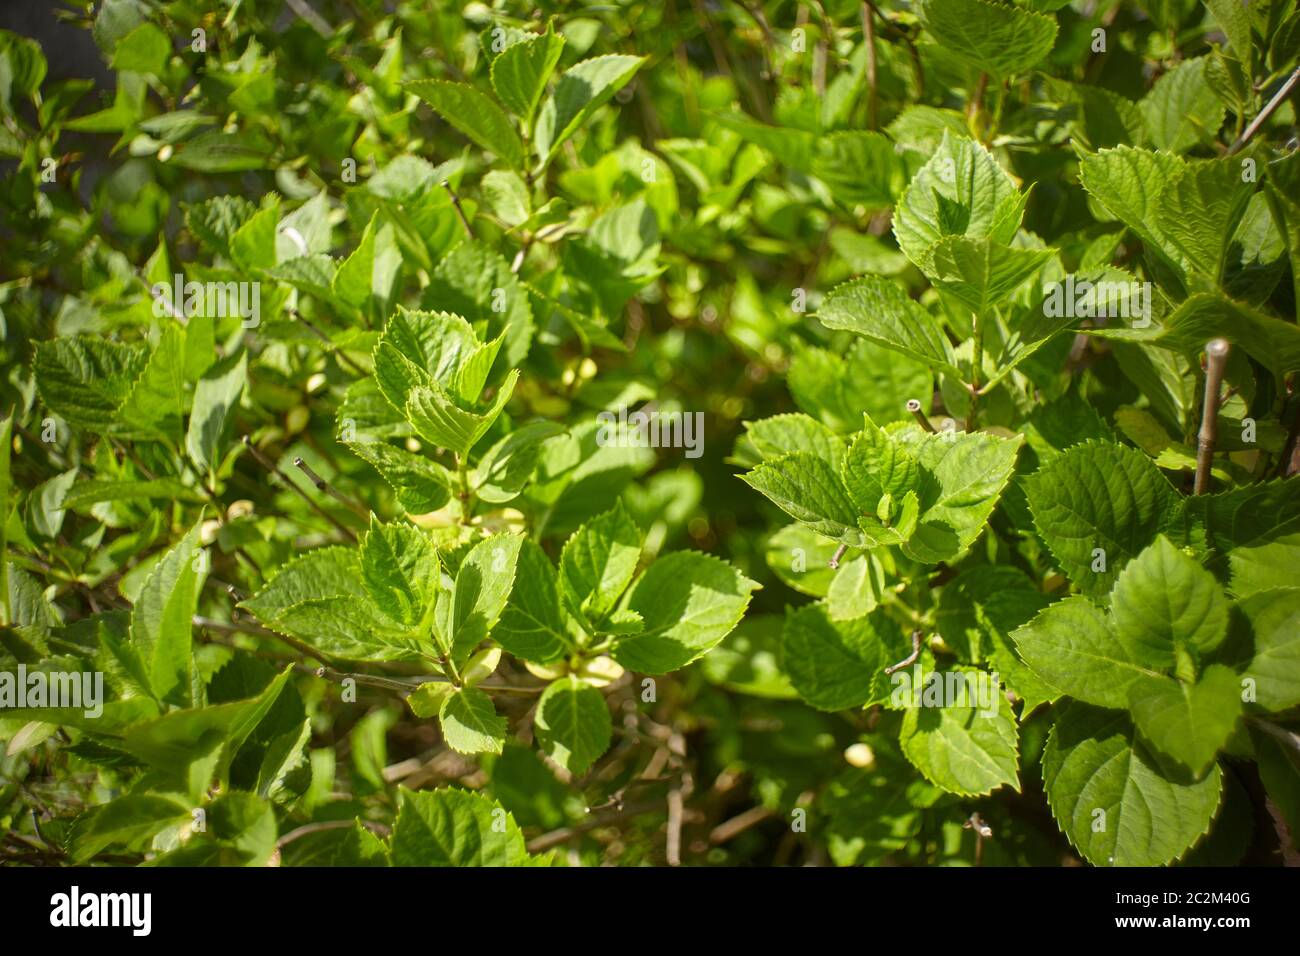 New leaves that are born in spring over a shrub used as an ornamental plant in a garden. Stock Photo